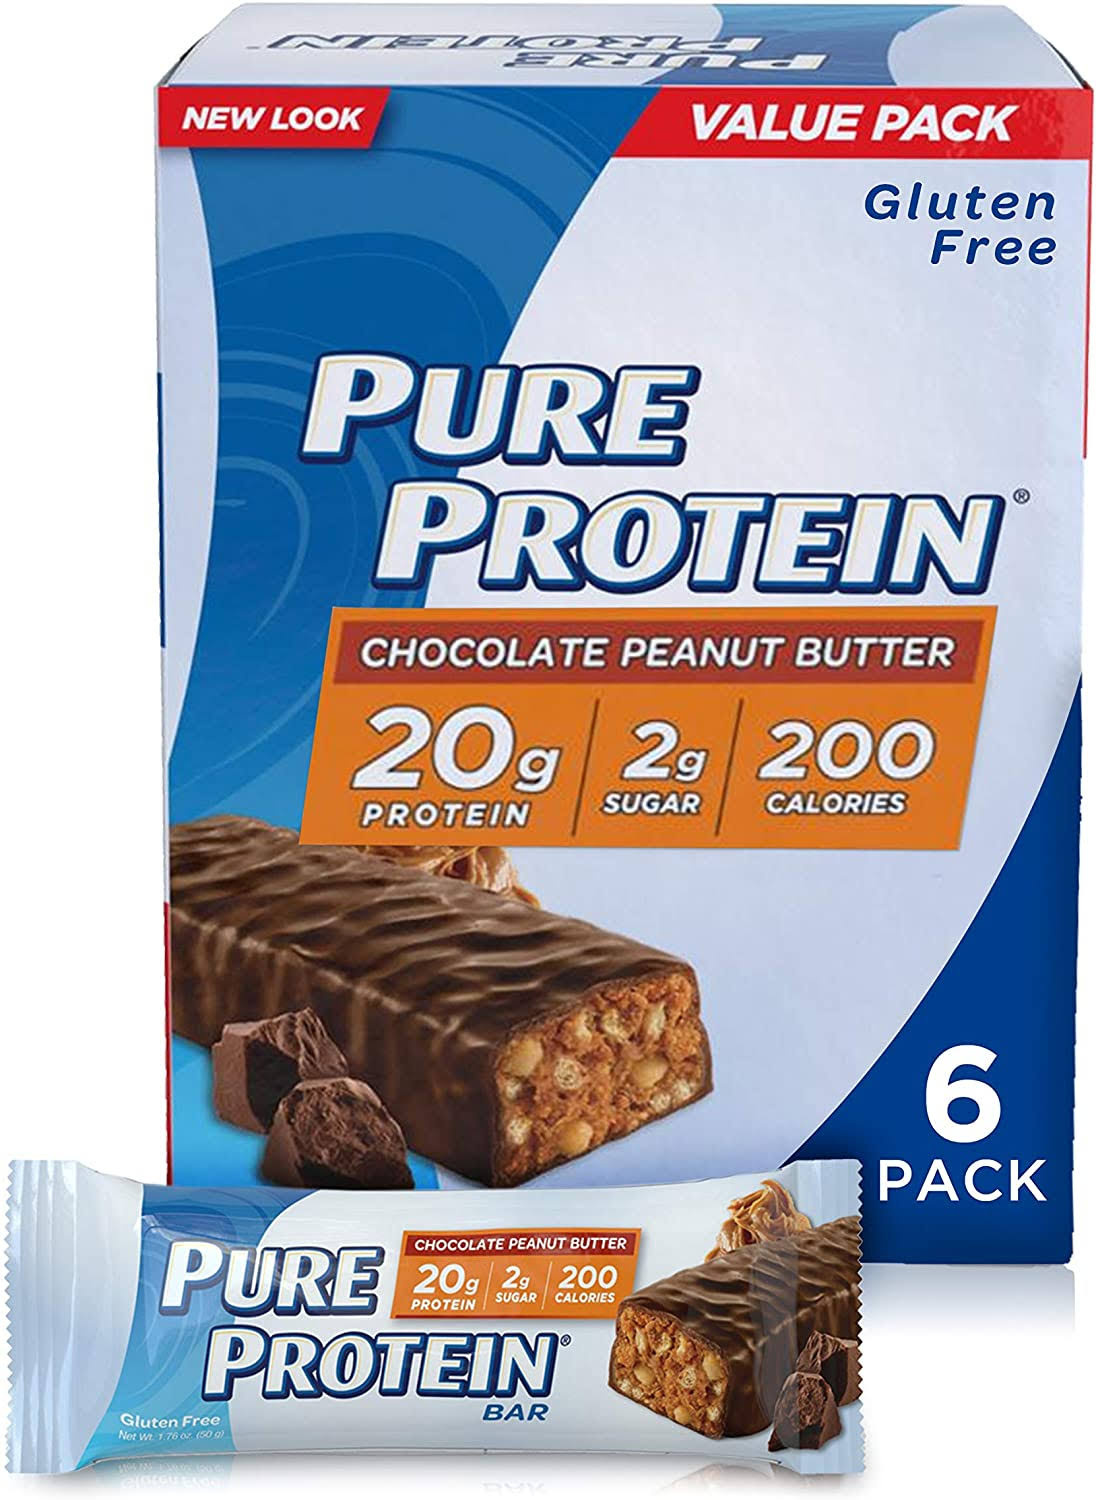 Pure Protein Bar - Chocolate Peanut Butter